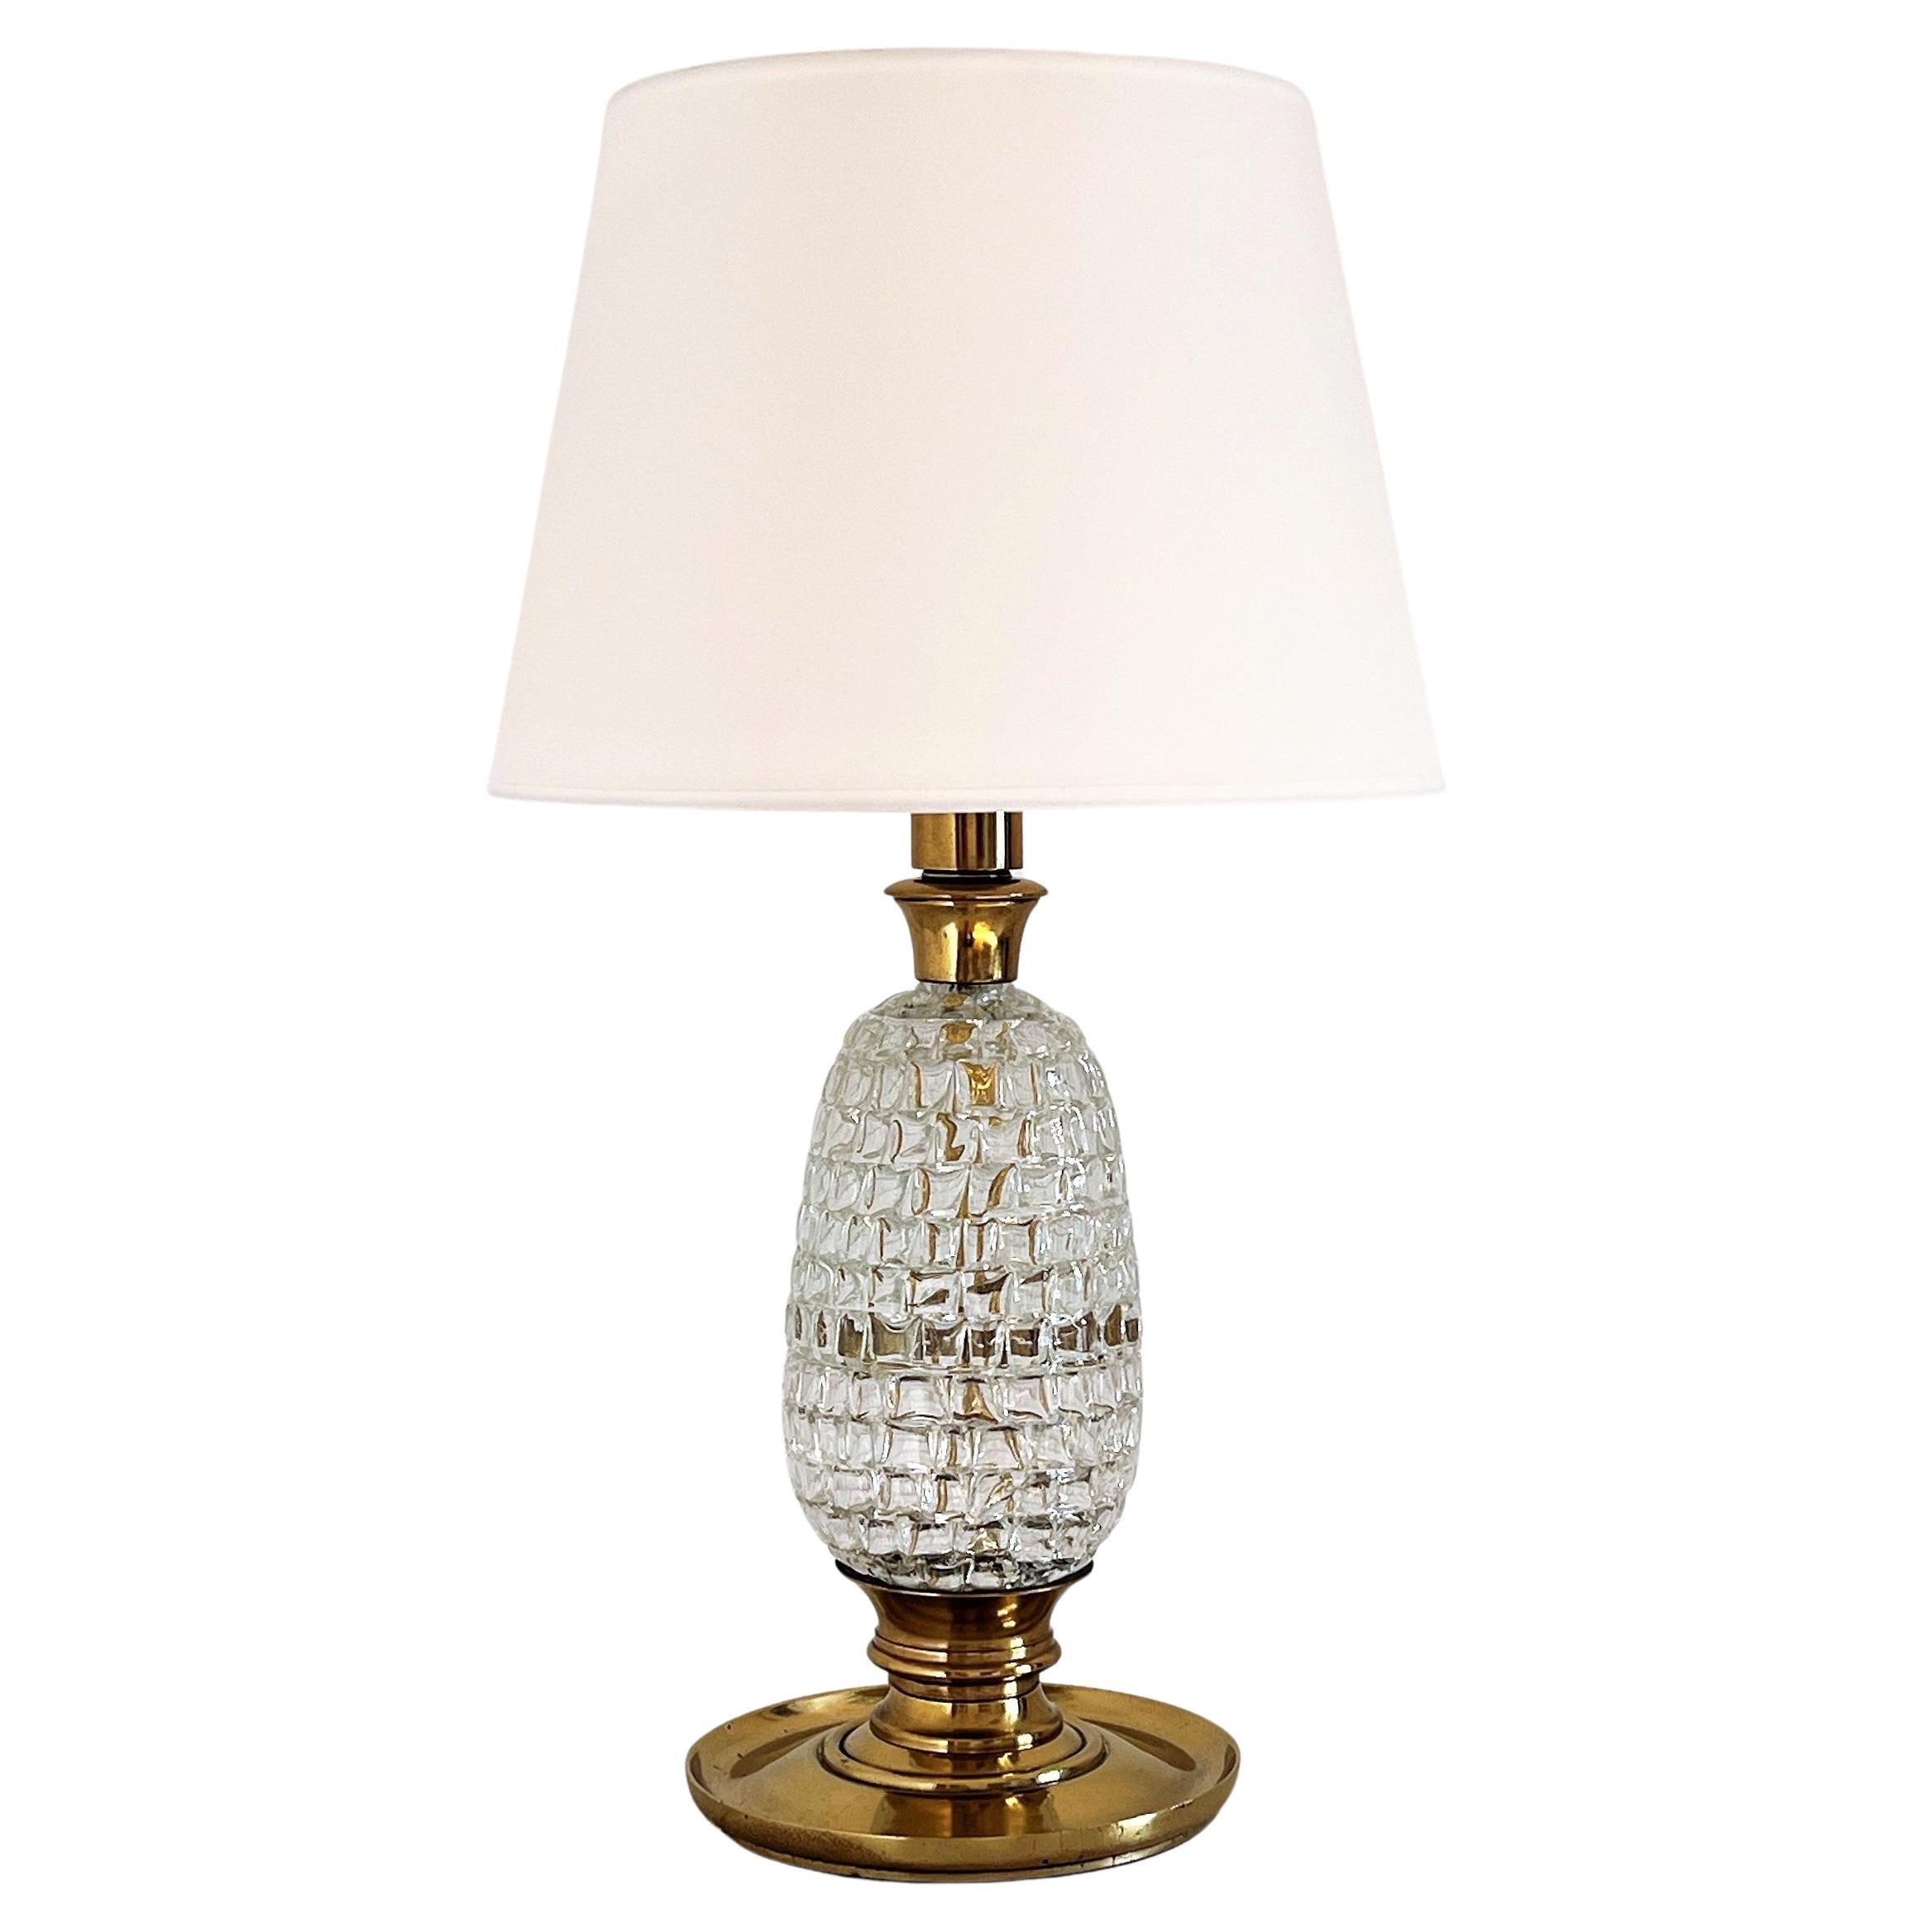 Italian Mid-Century Table Lamp with Brass and Creased Murano Glass Body, 1960s